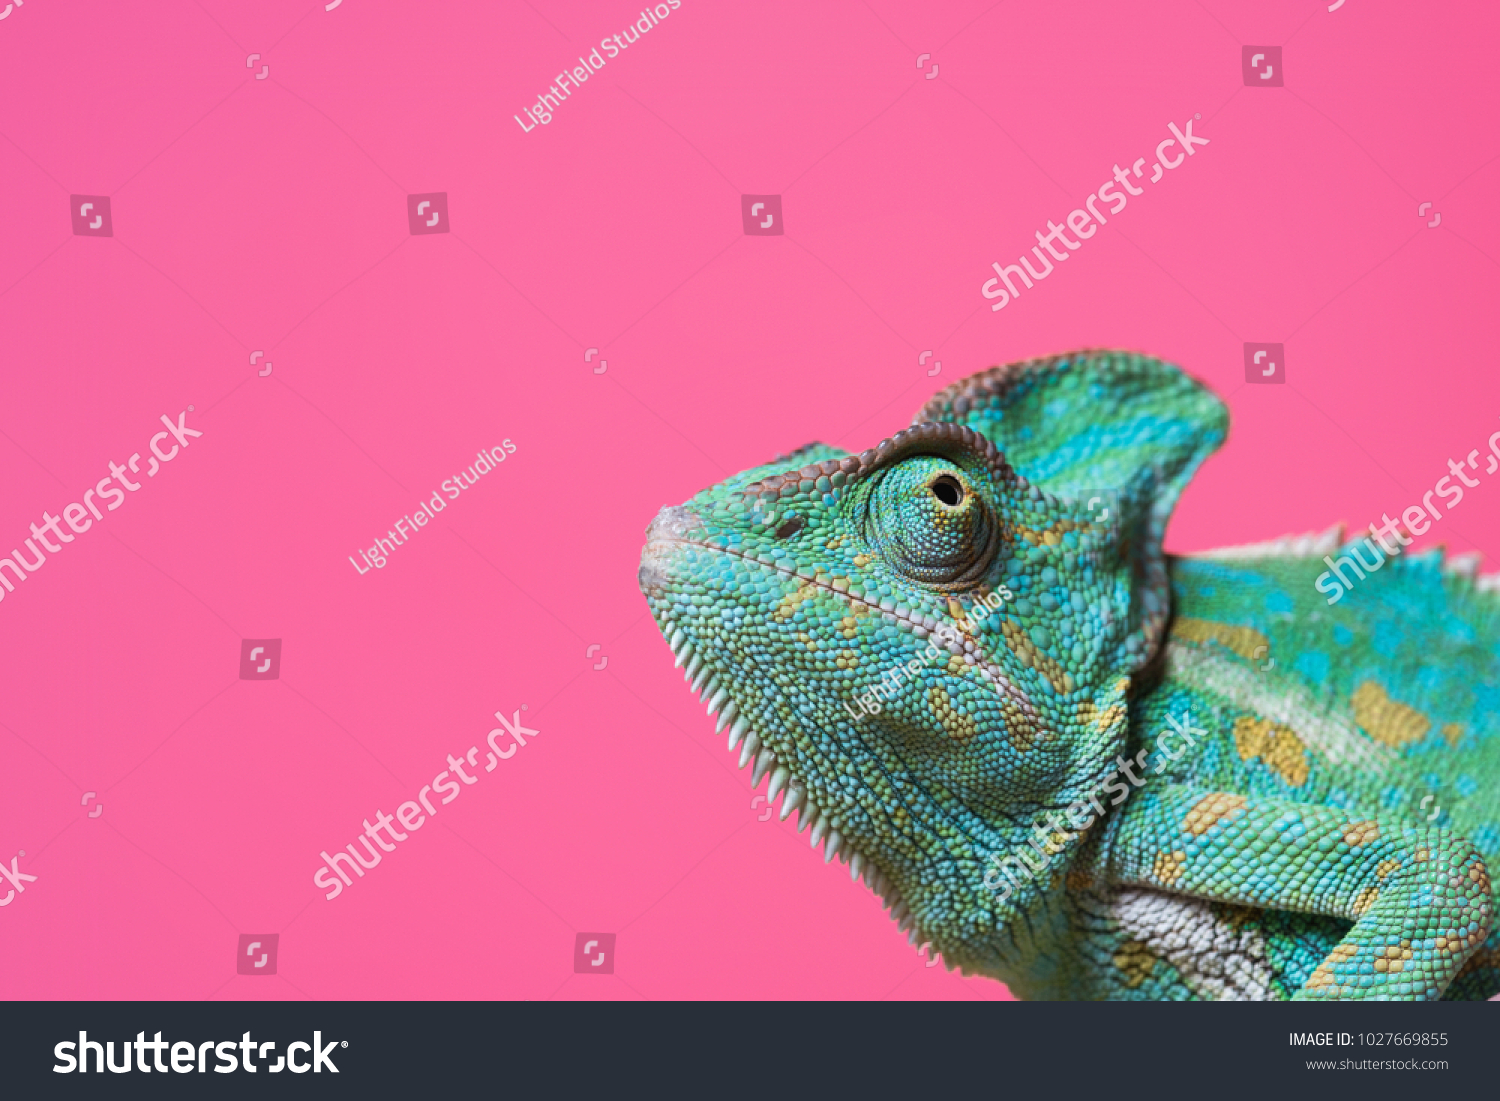 close-up view of cute colorful exotic chameleon isolated on pink #1027669855